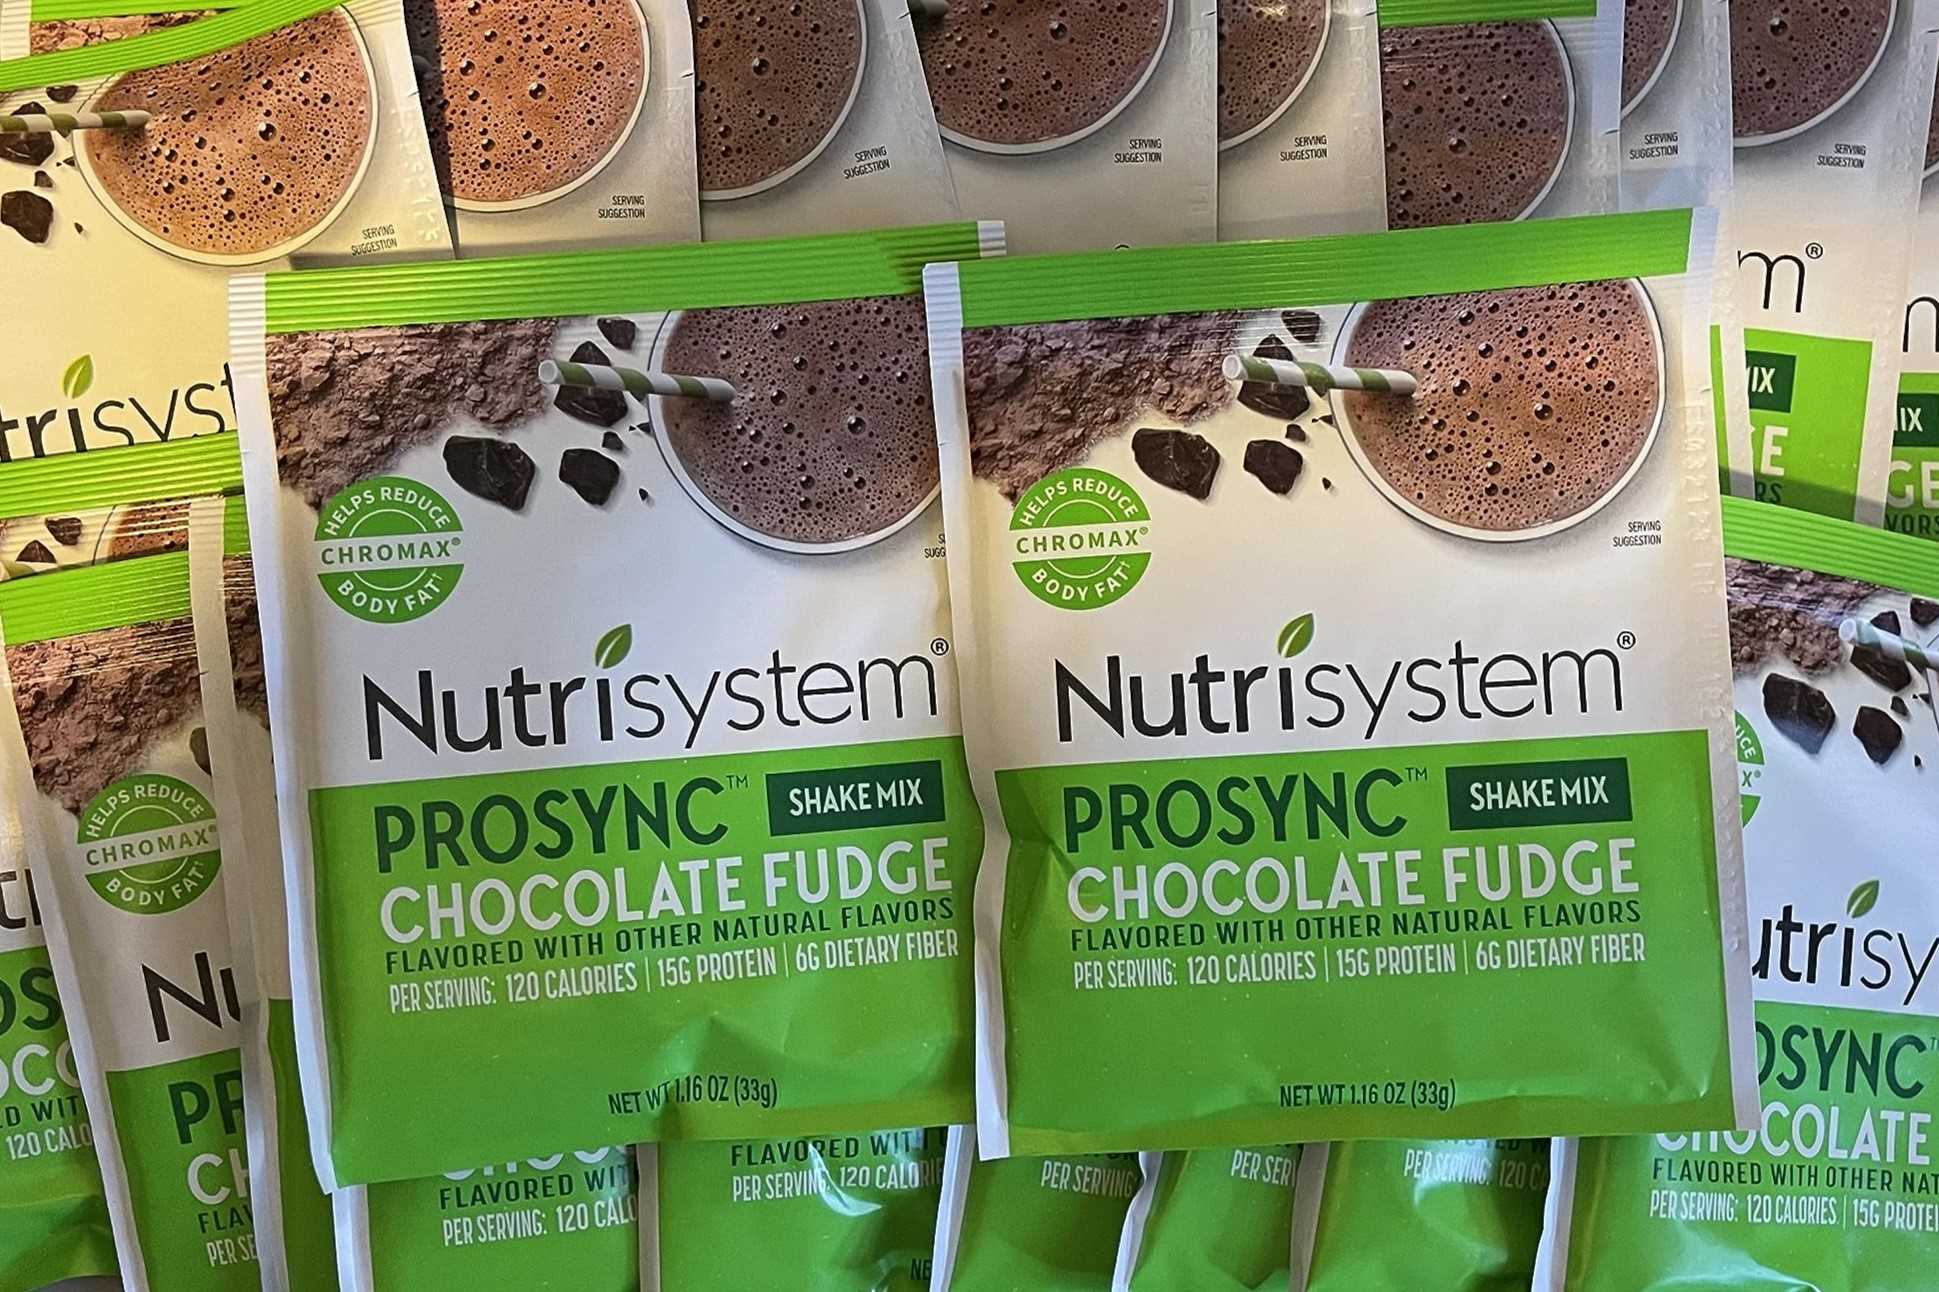 10 Nutrisystem Shakes Nutrition Facts - Facts.net